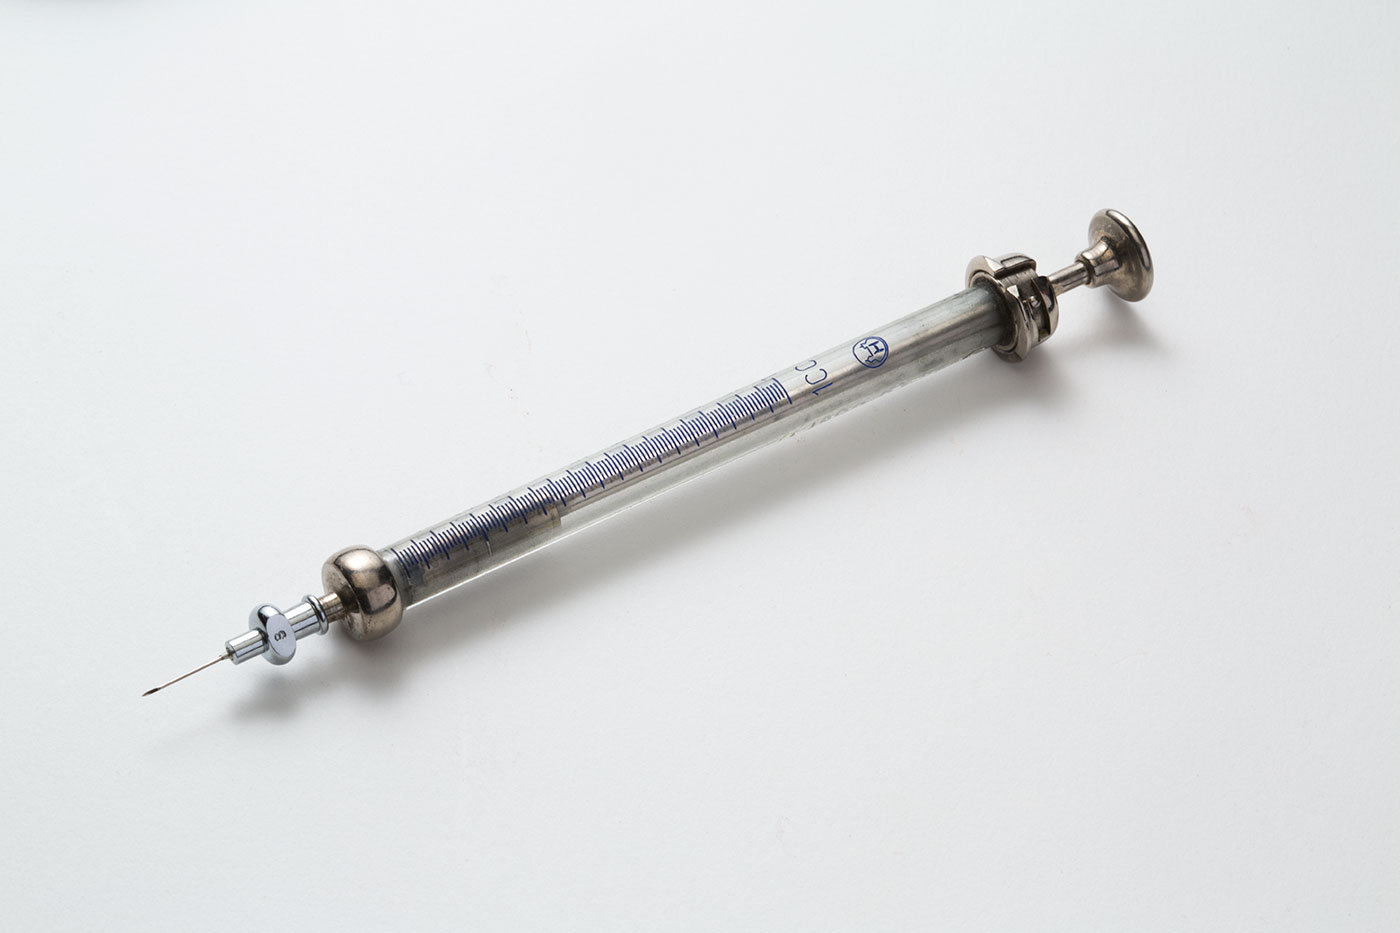 A photo of a syringe with white background - click to view larger image